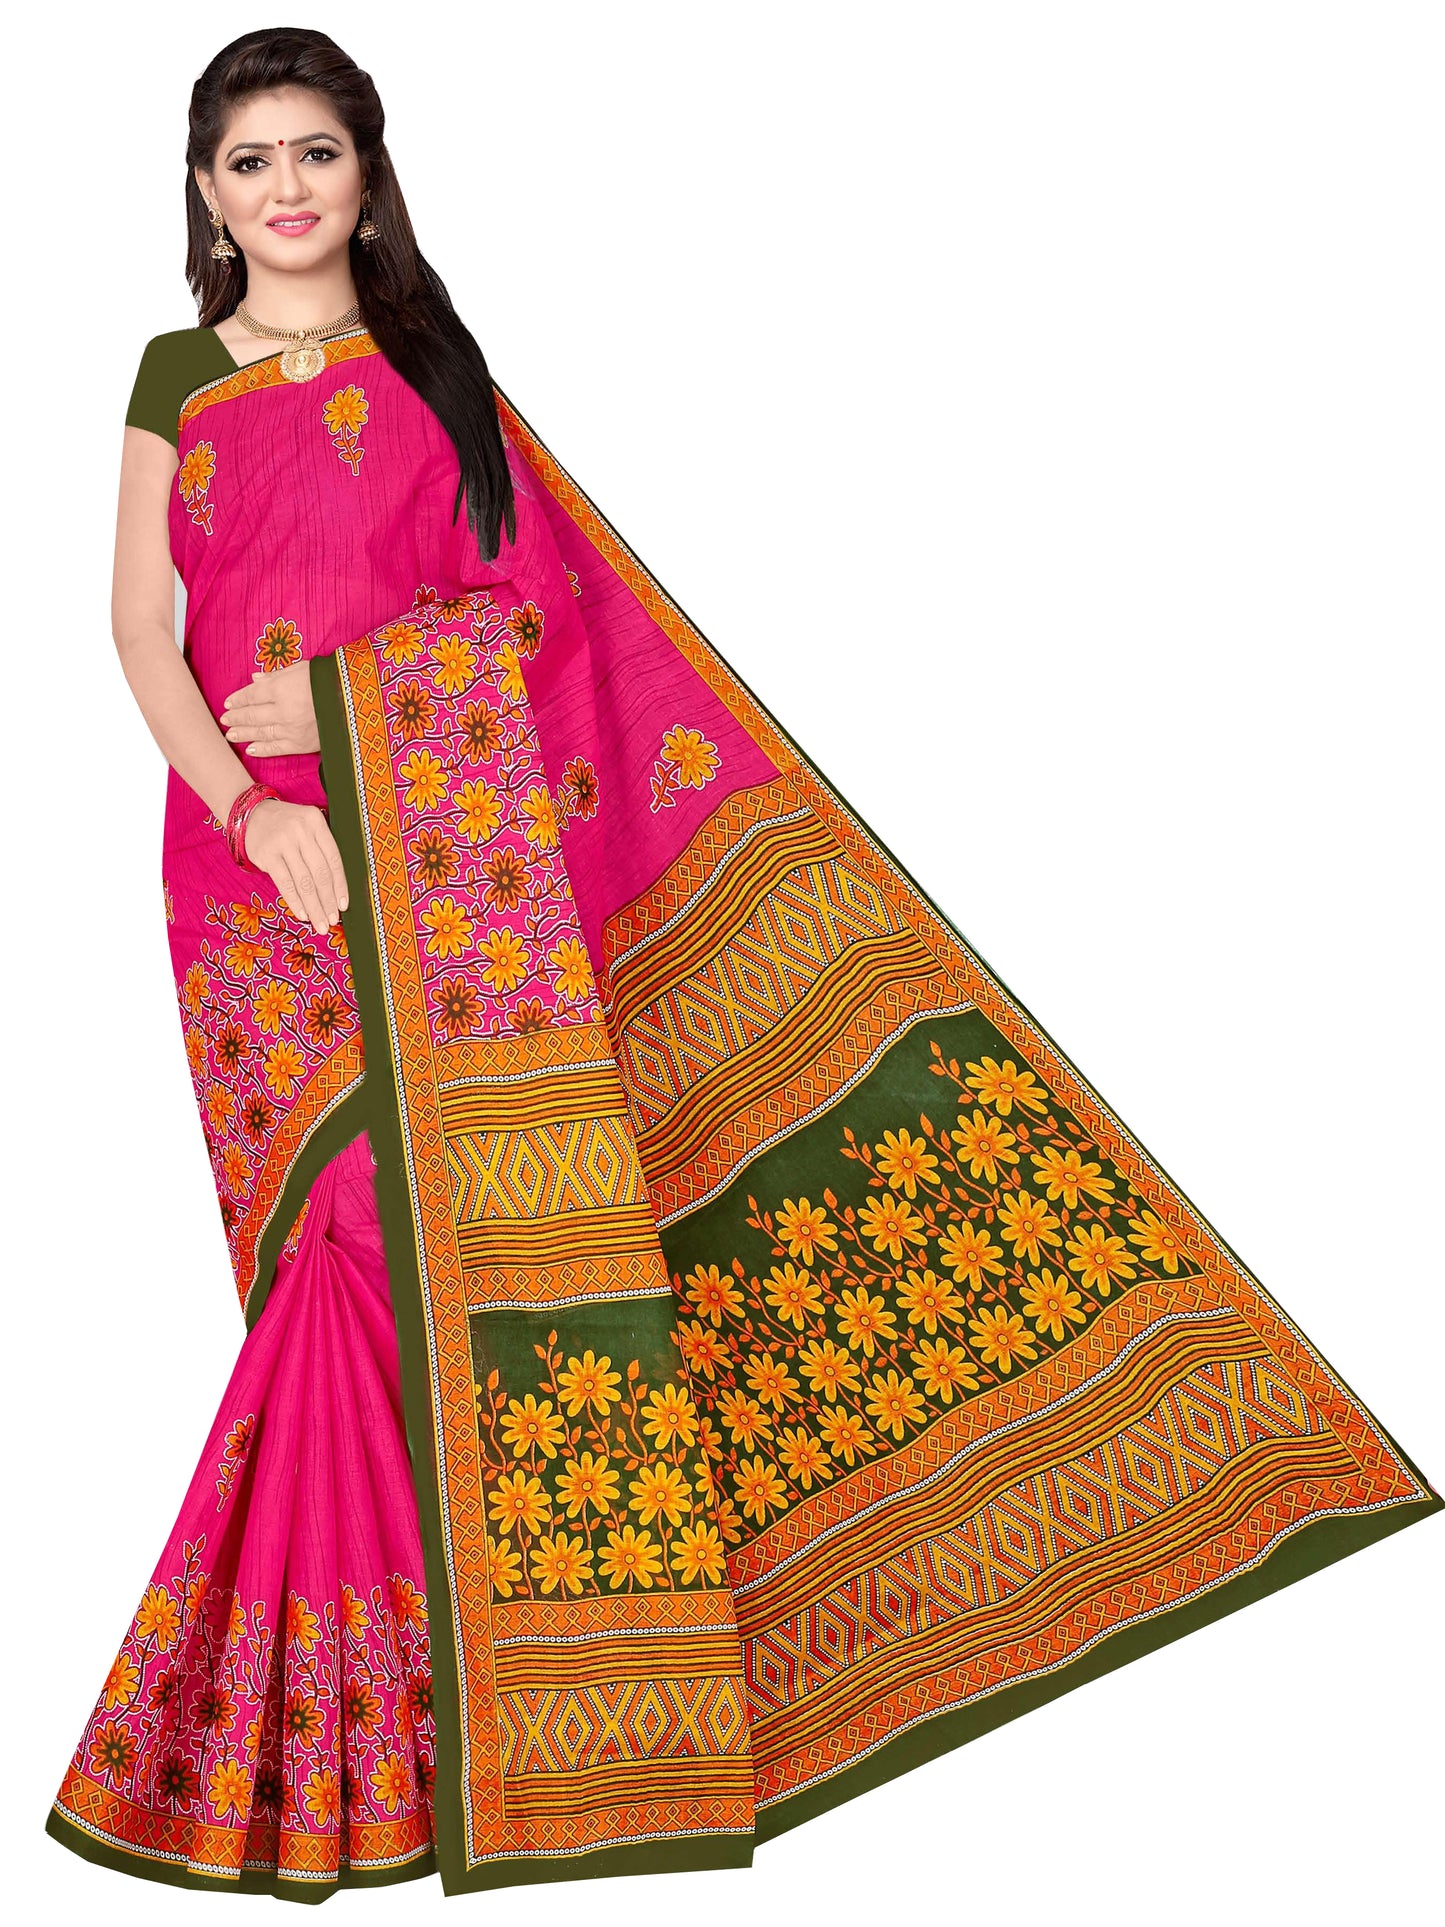 Pure Cotton Saree for Women, Casual Wear (Item Code: XYZCCSKR2)